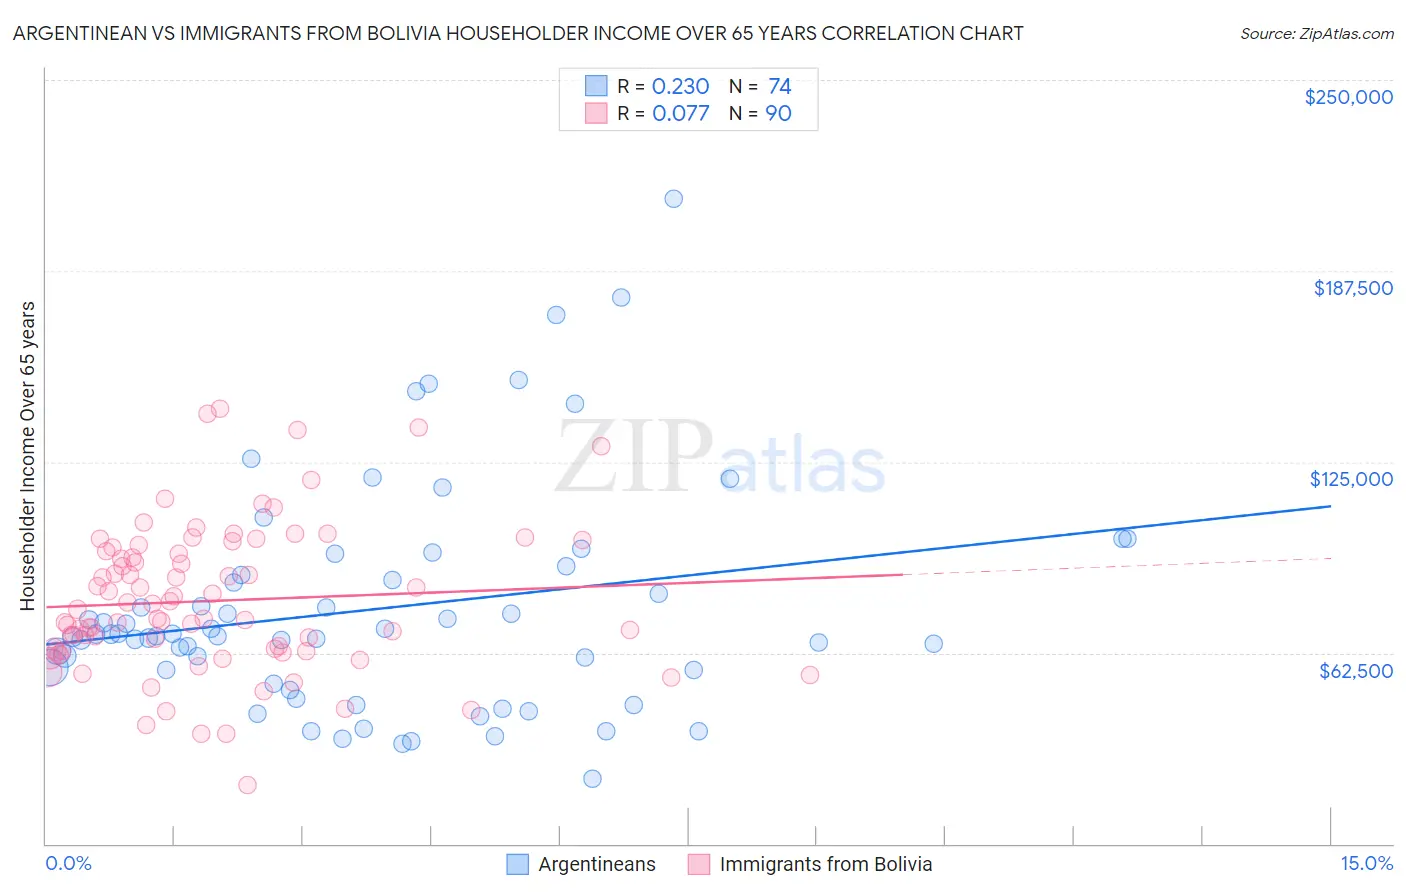 Argentinean vs Immigrants from Bolivia Householder Income Over 65 years